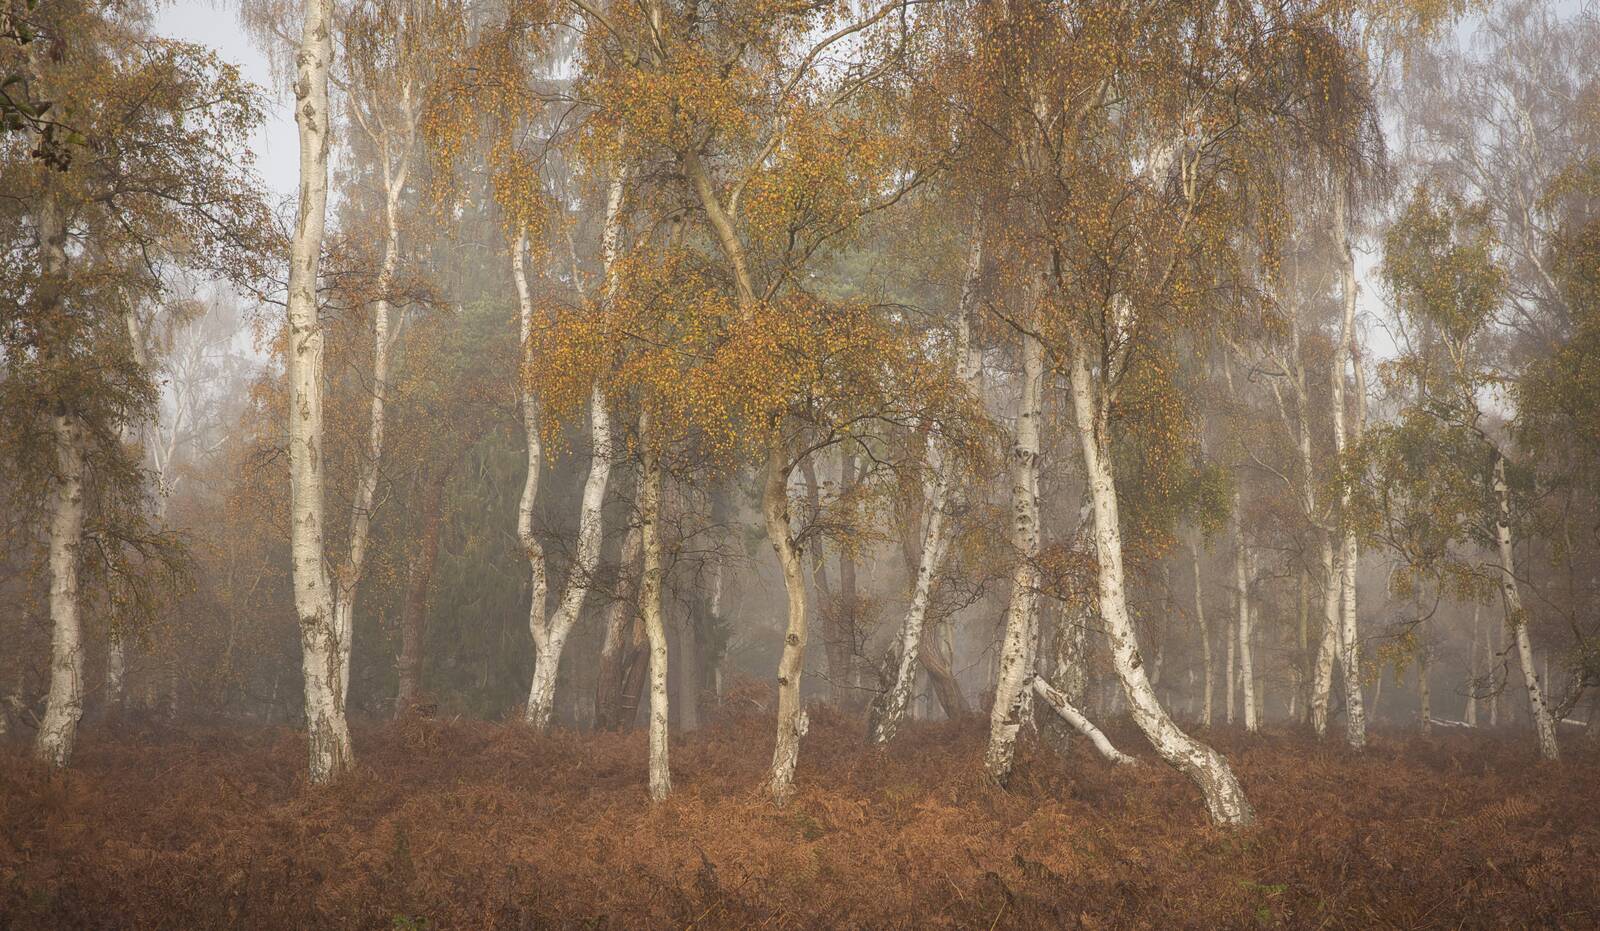 Image of Holme Fen Nature Reserve by David George